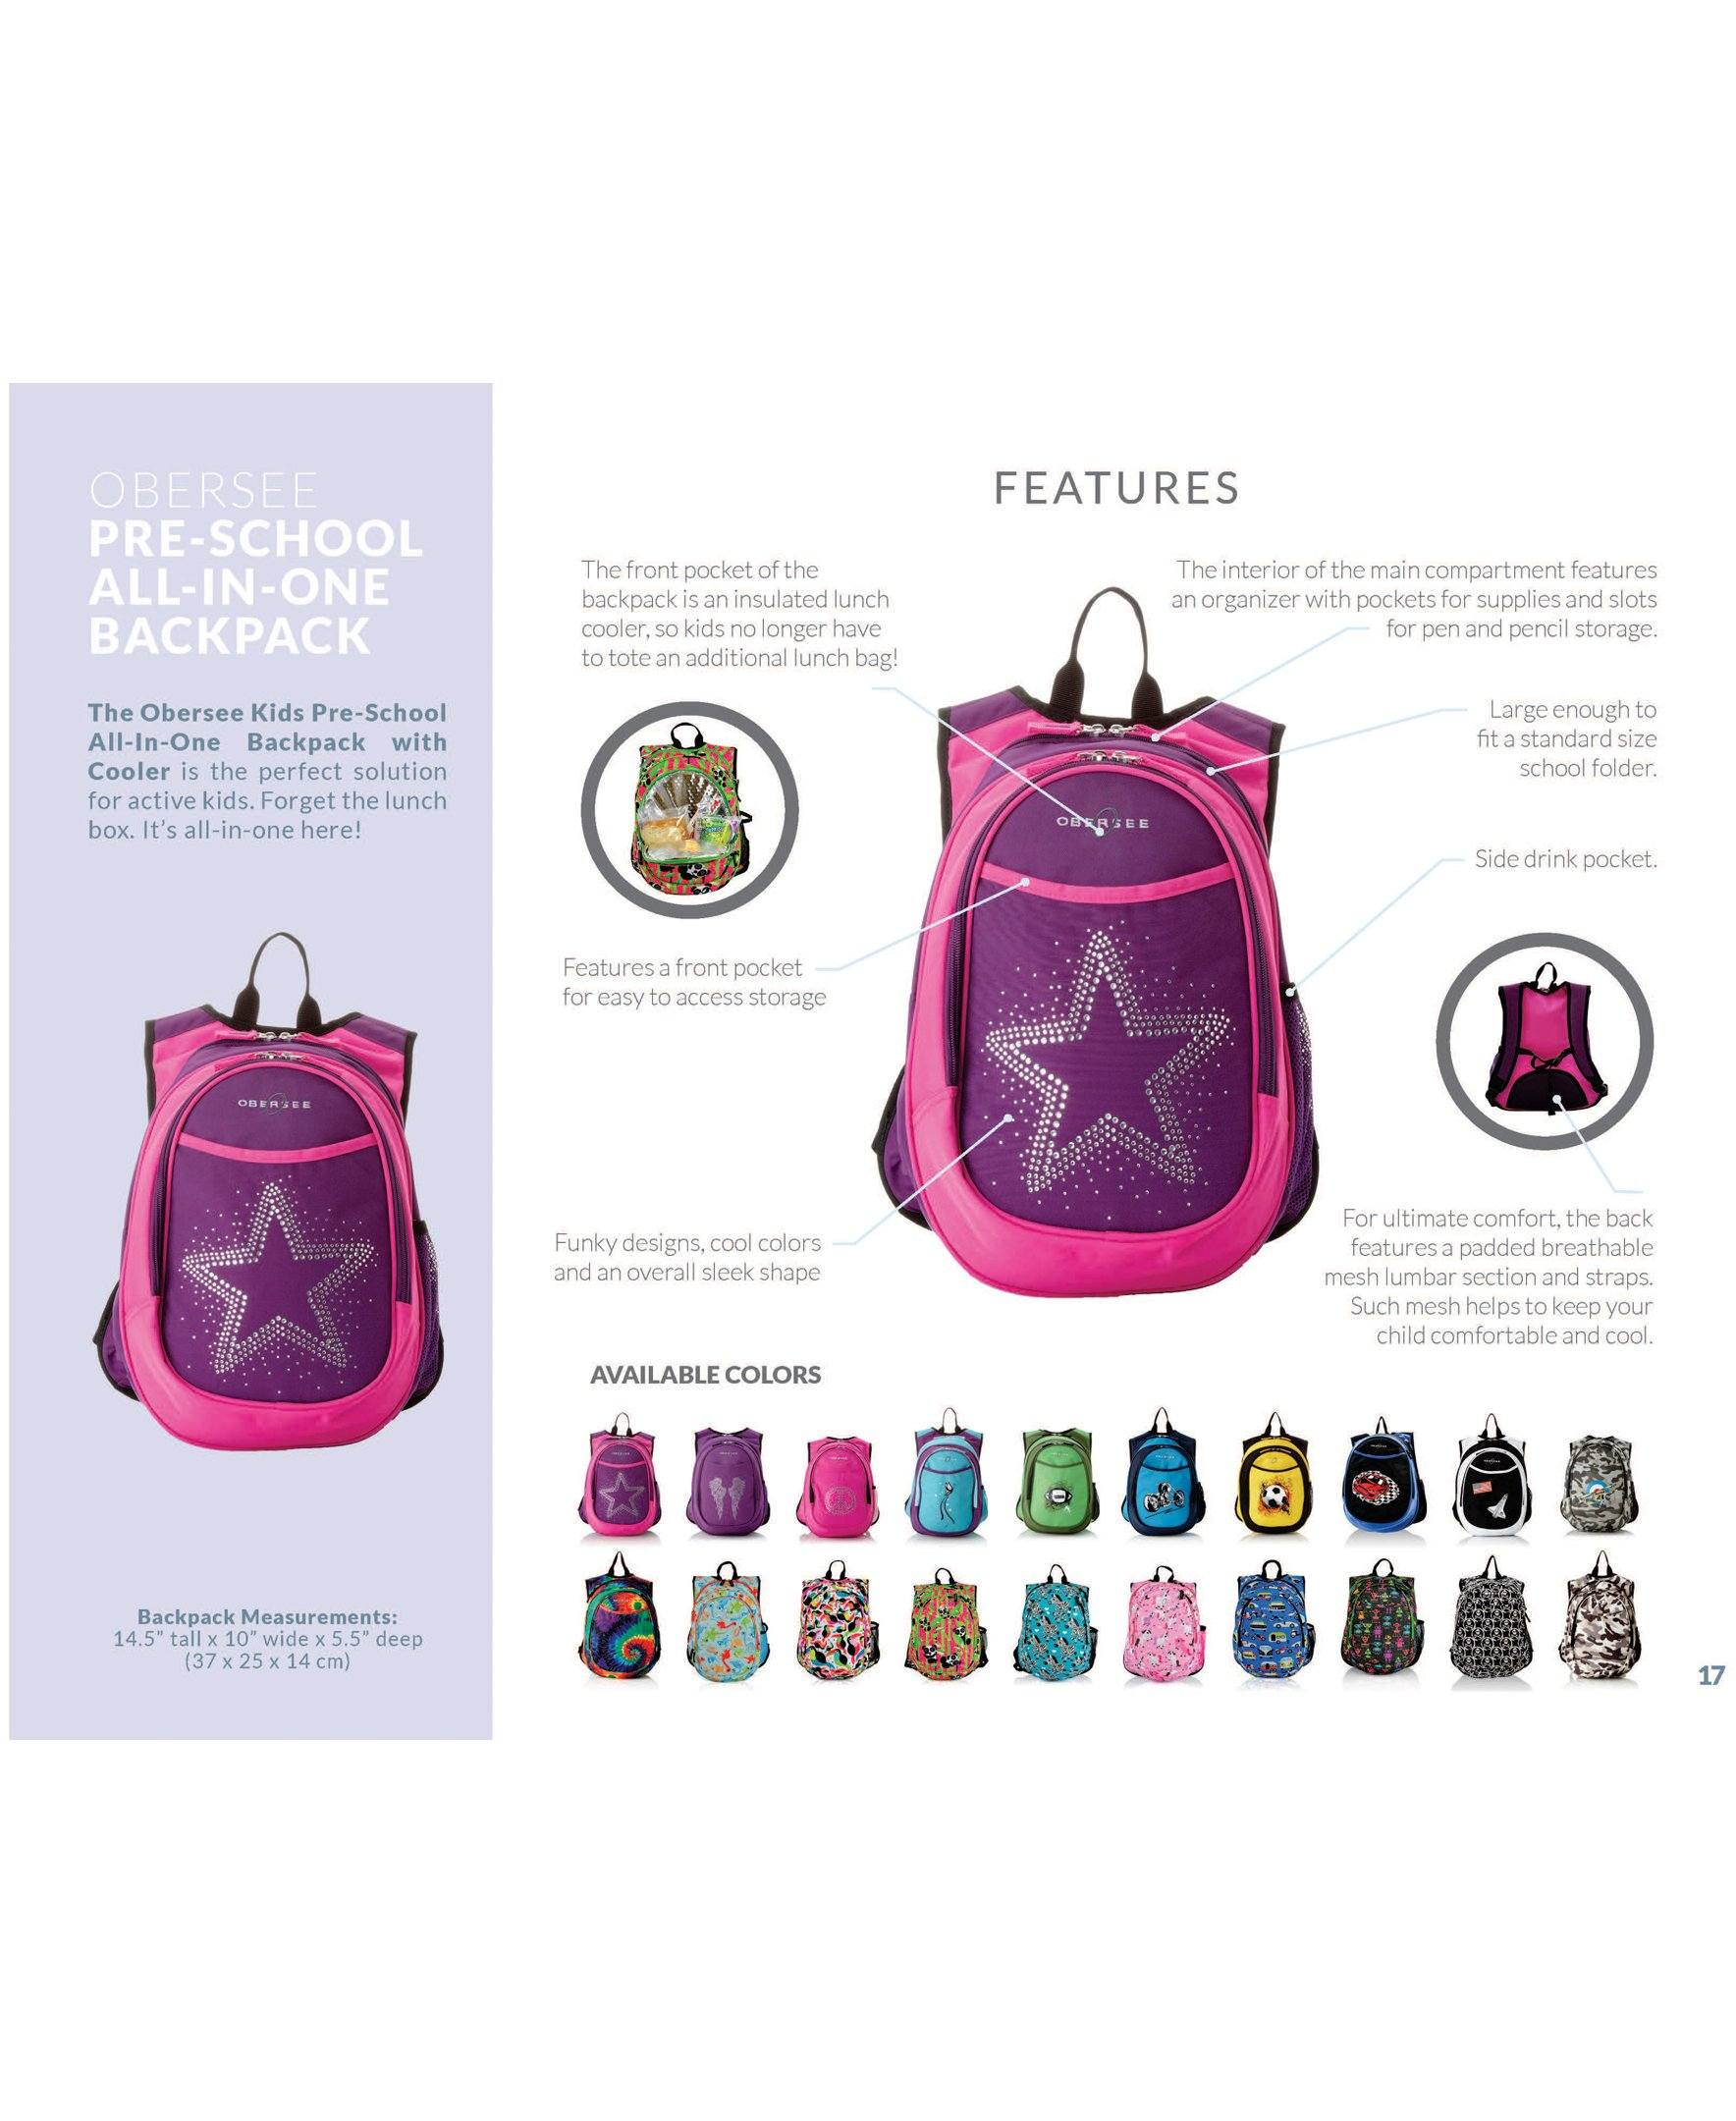 O3KCBP001 Obersee Mini Preschool All-in-One Backpack for Toddlers and Kids with integrated Insulated Cooler | Rhinestone Angel Wings - image 4 of 6